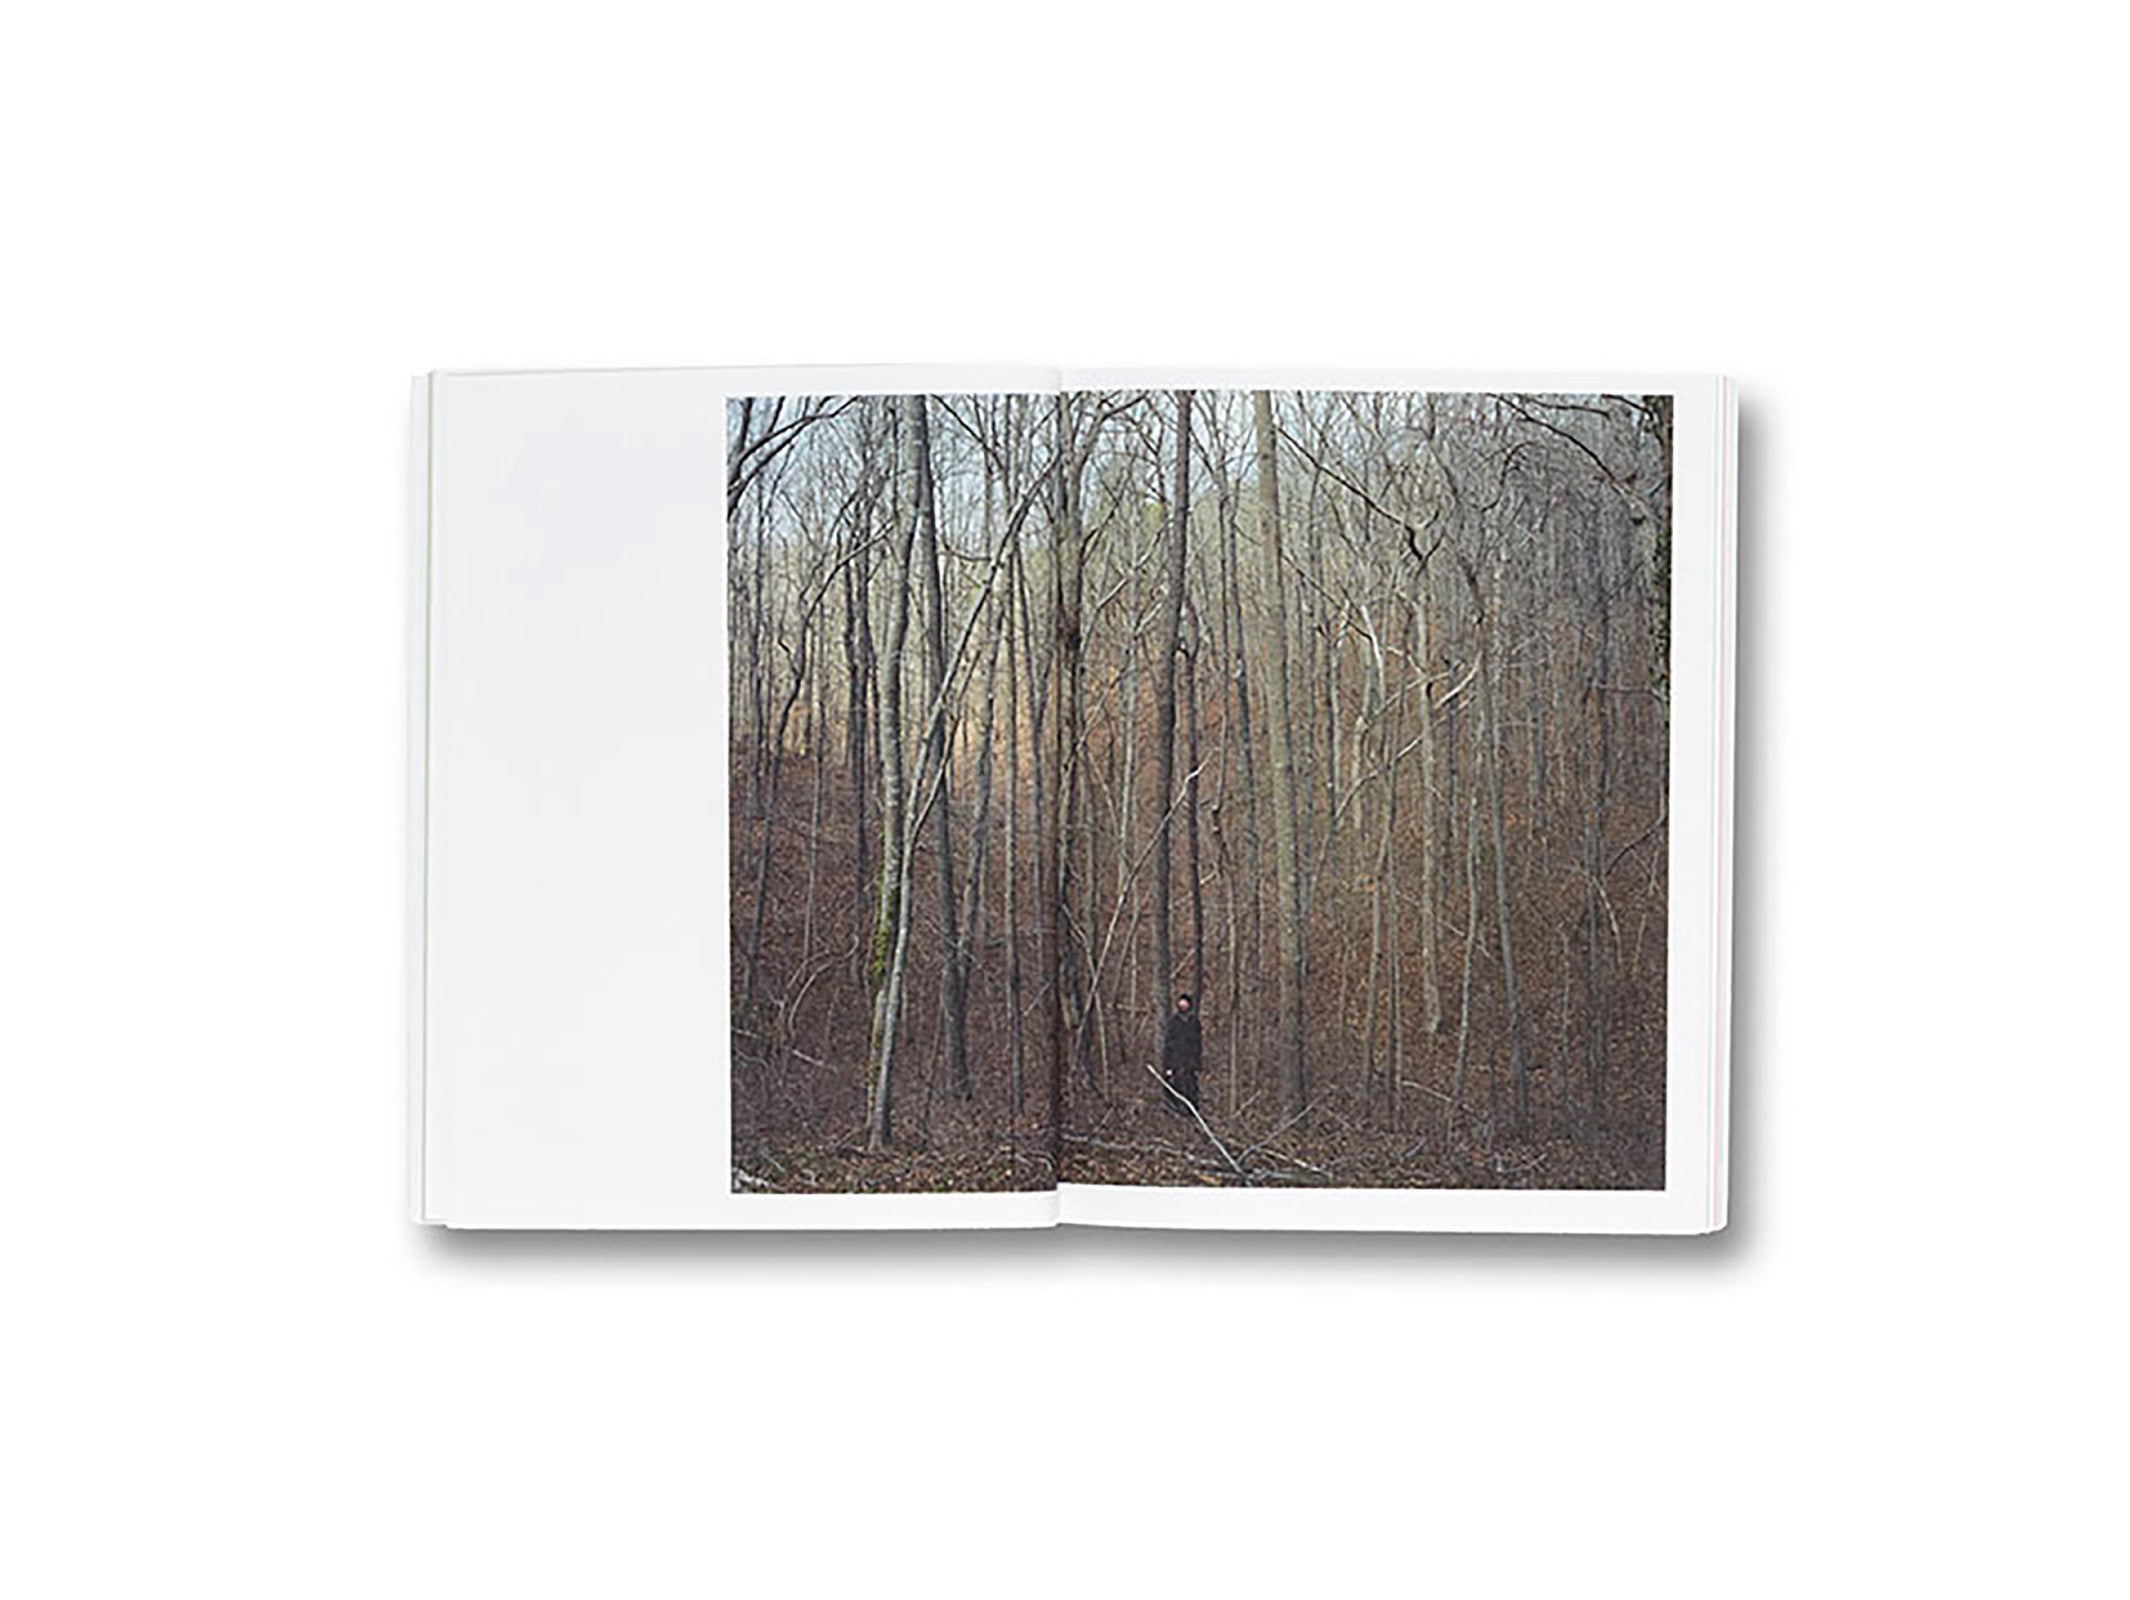 GATHERED LEAVES by Alec Soth